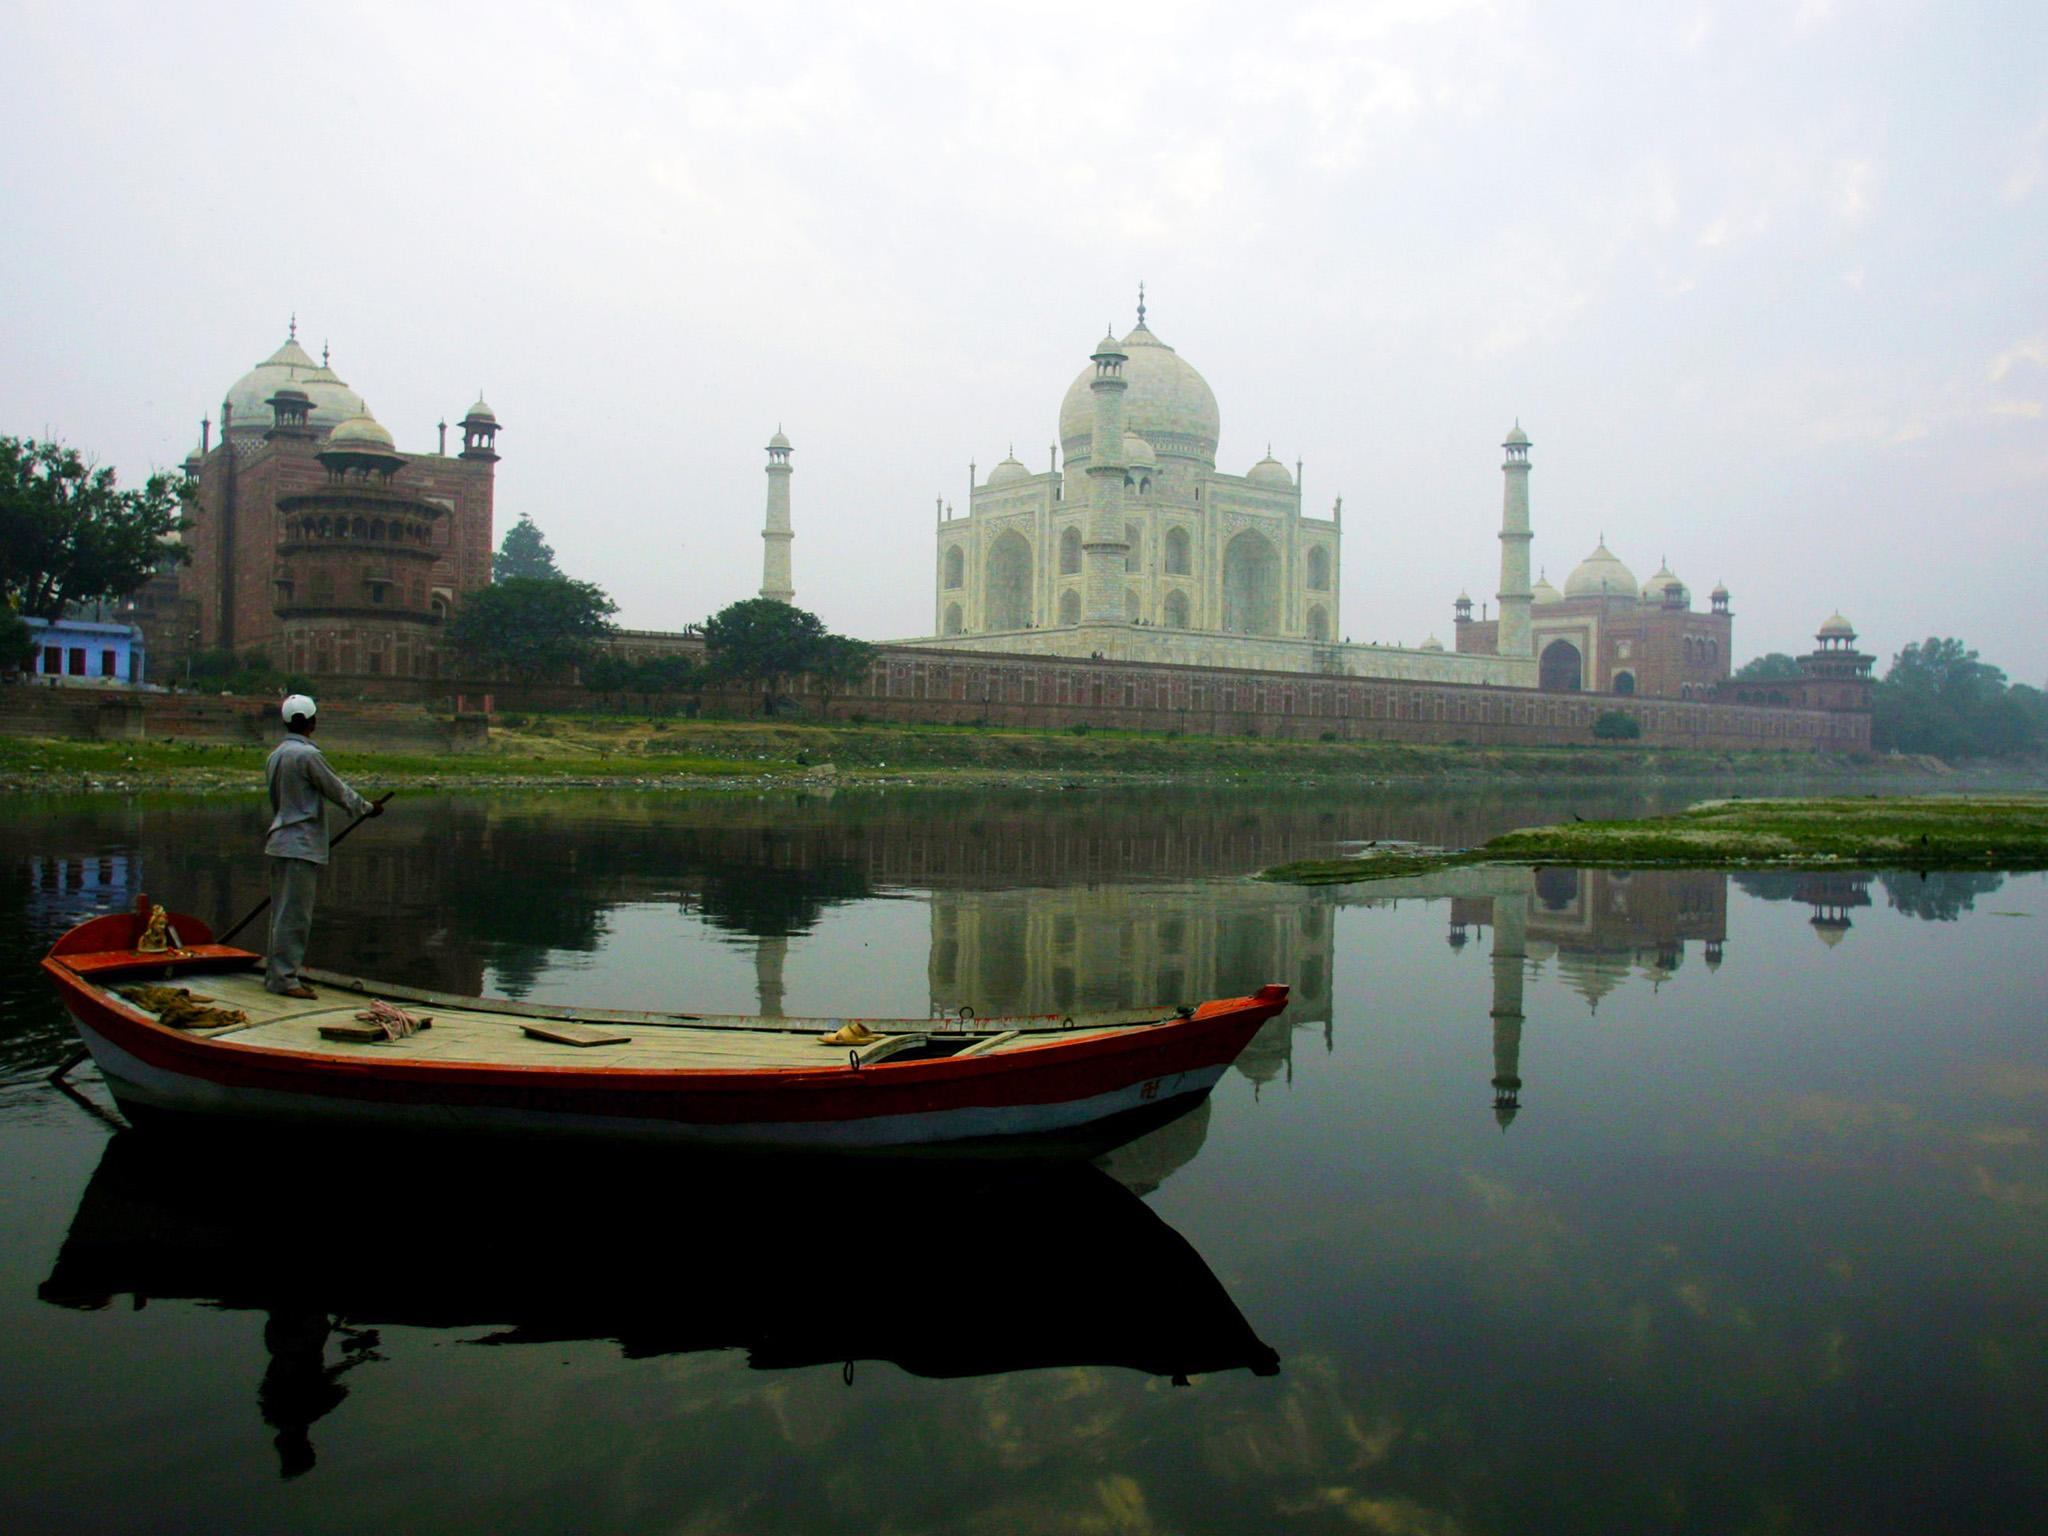 Taj Mahal as seen from the banks of the river Yamuna in Agra, India